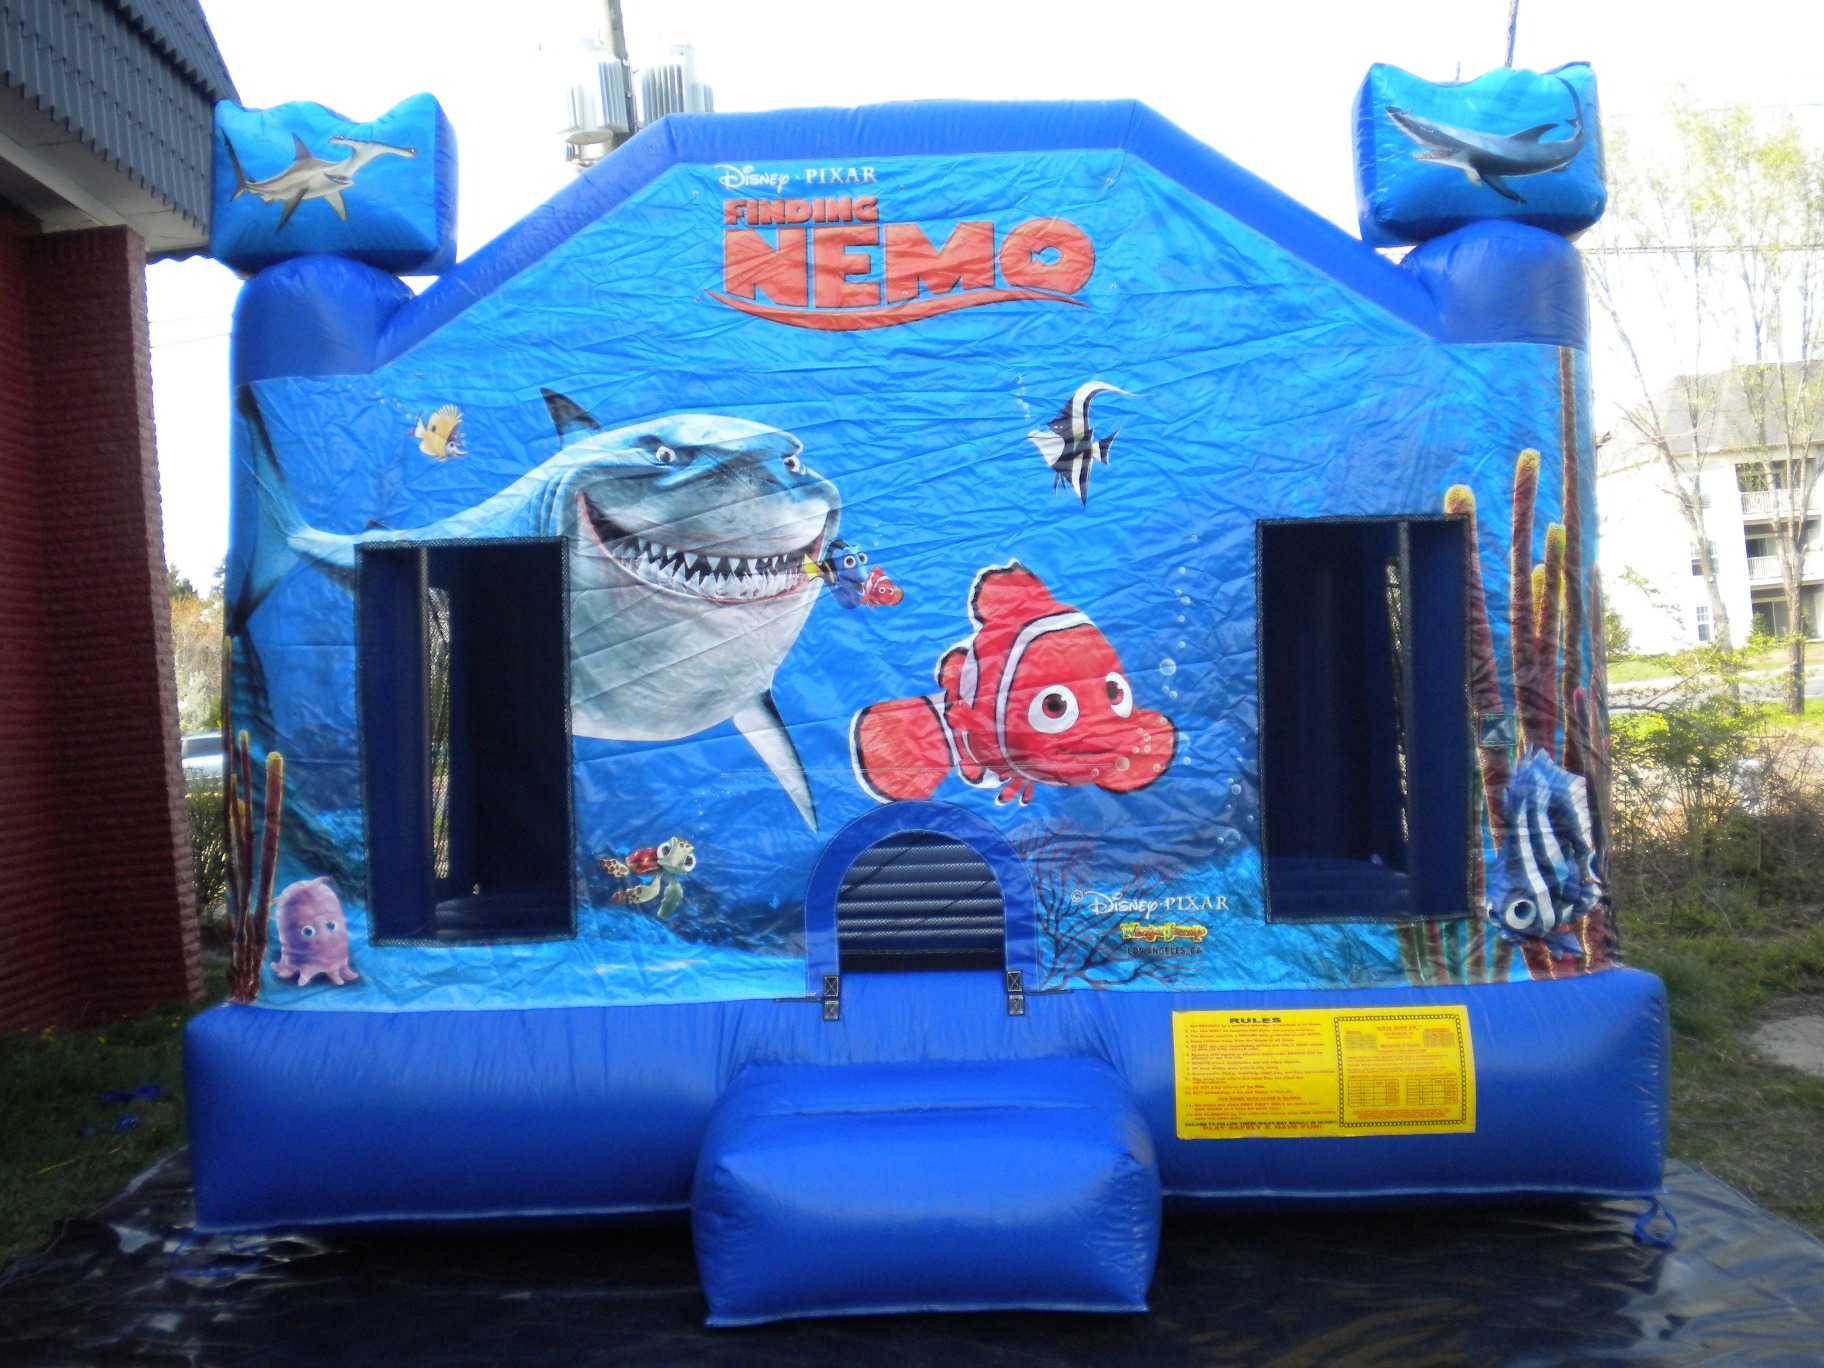 Finding Nemo Jumper Moonbouce Bounce House Front View